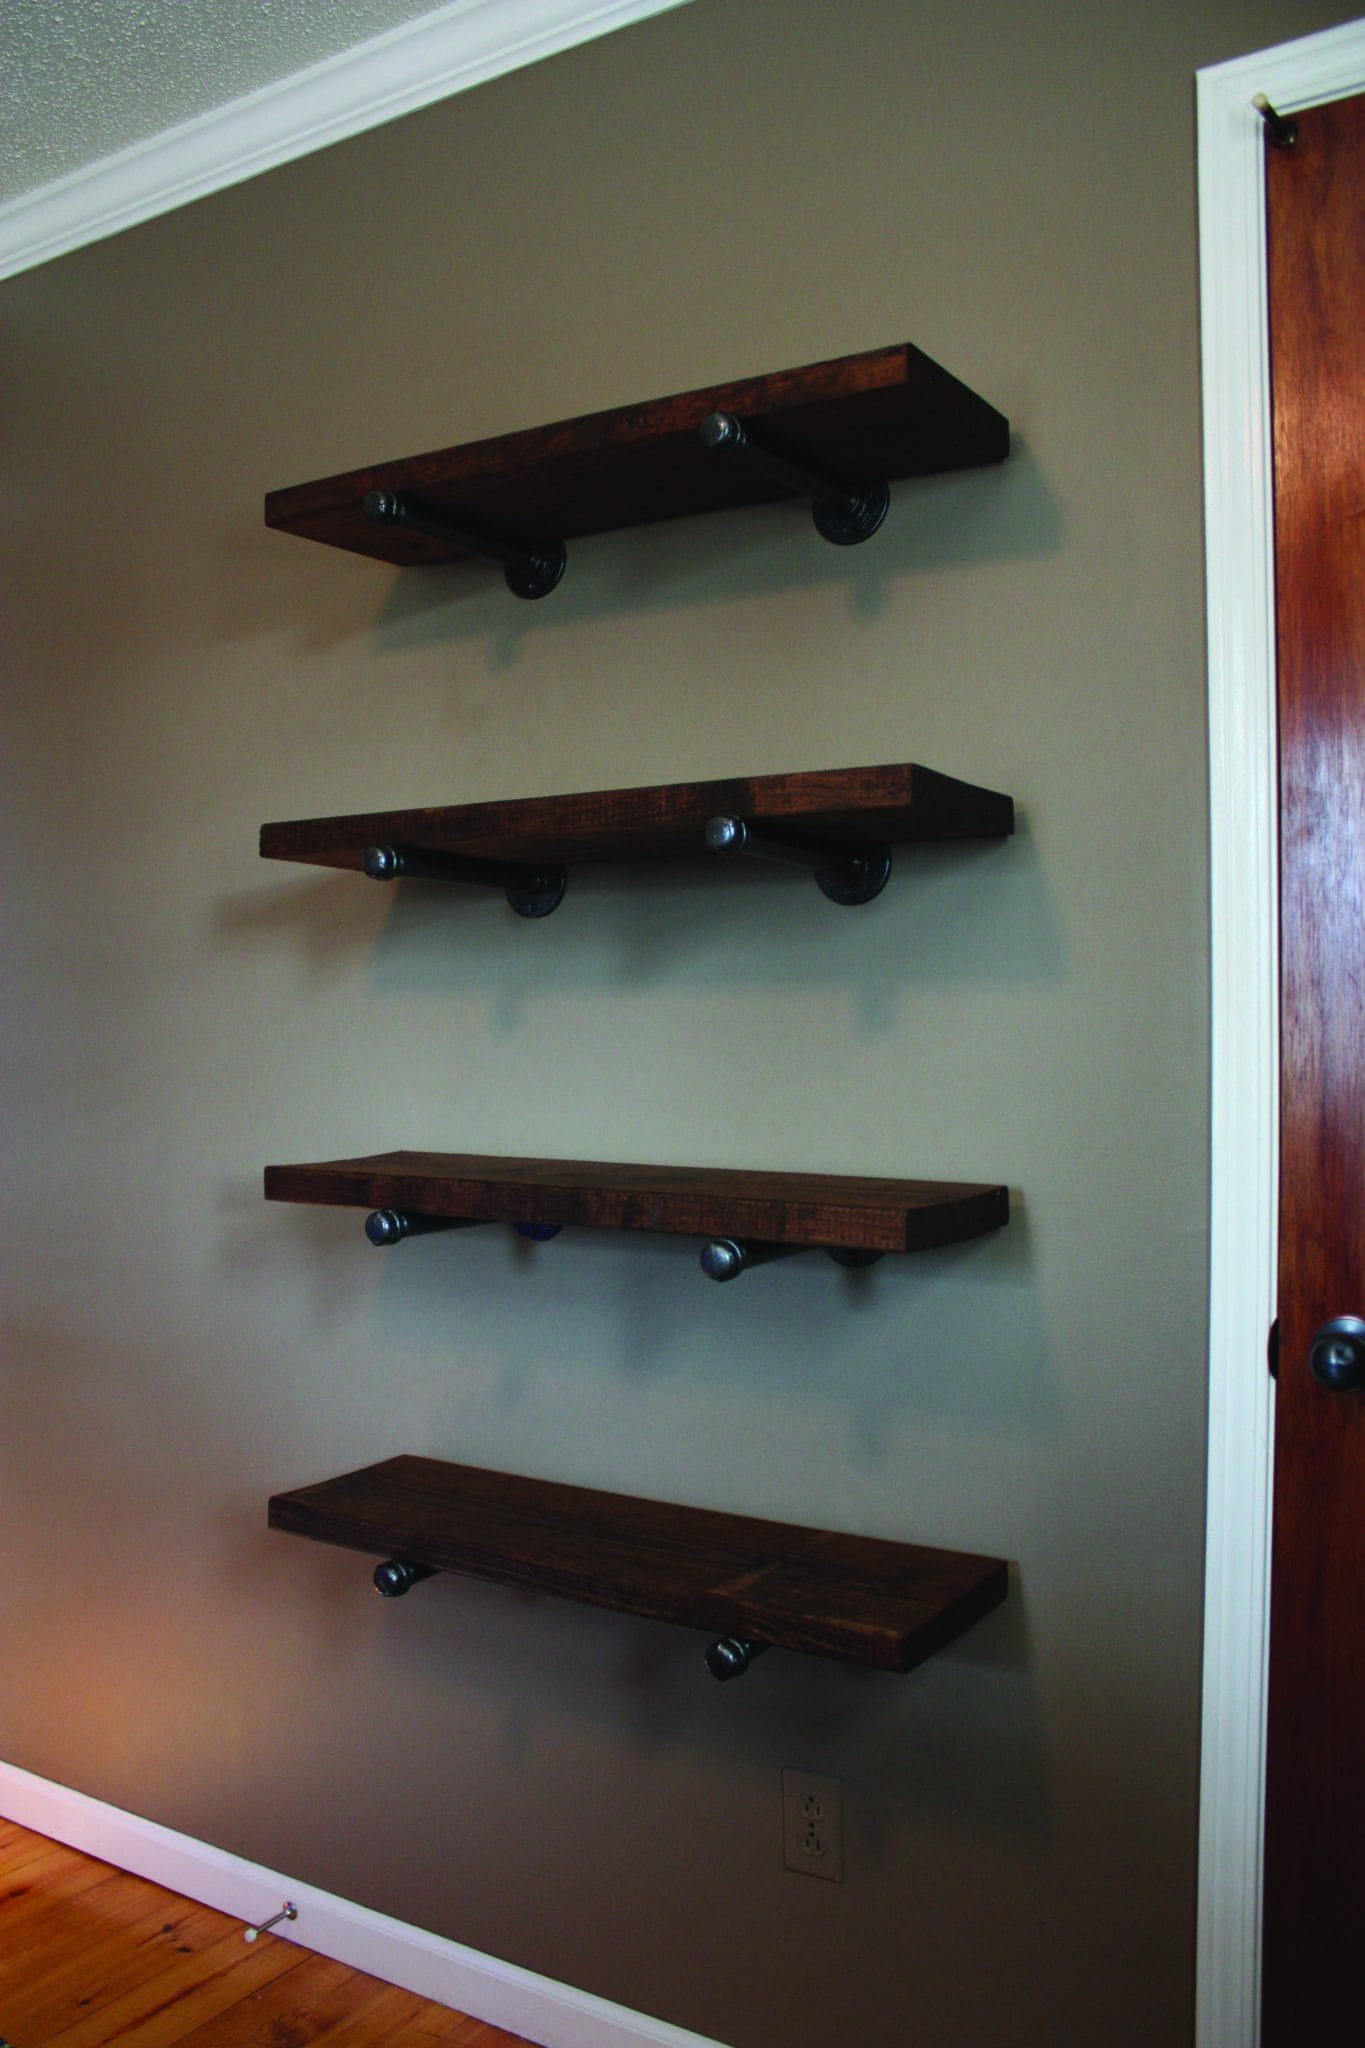 Pipe Bracket Shelving Extreme How To, Pipe Hangers For Shelves